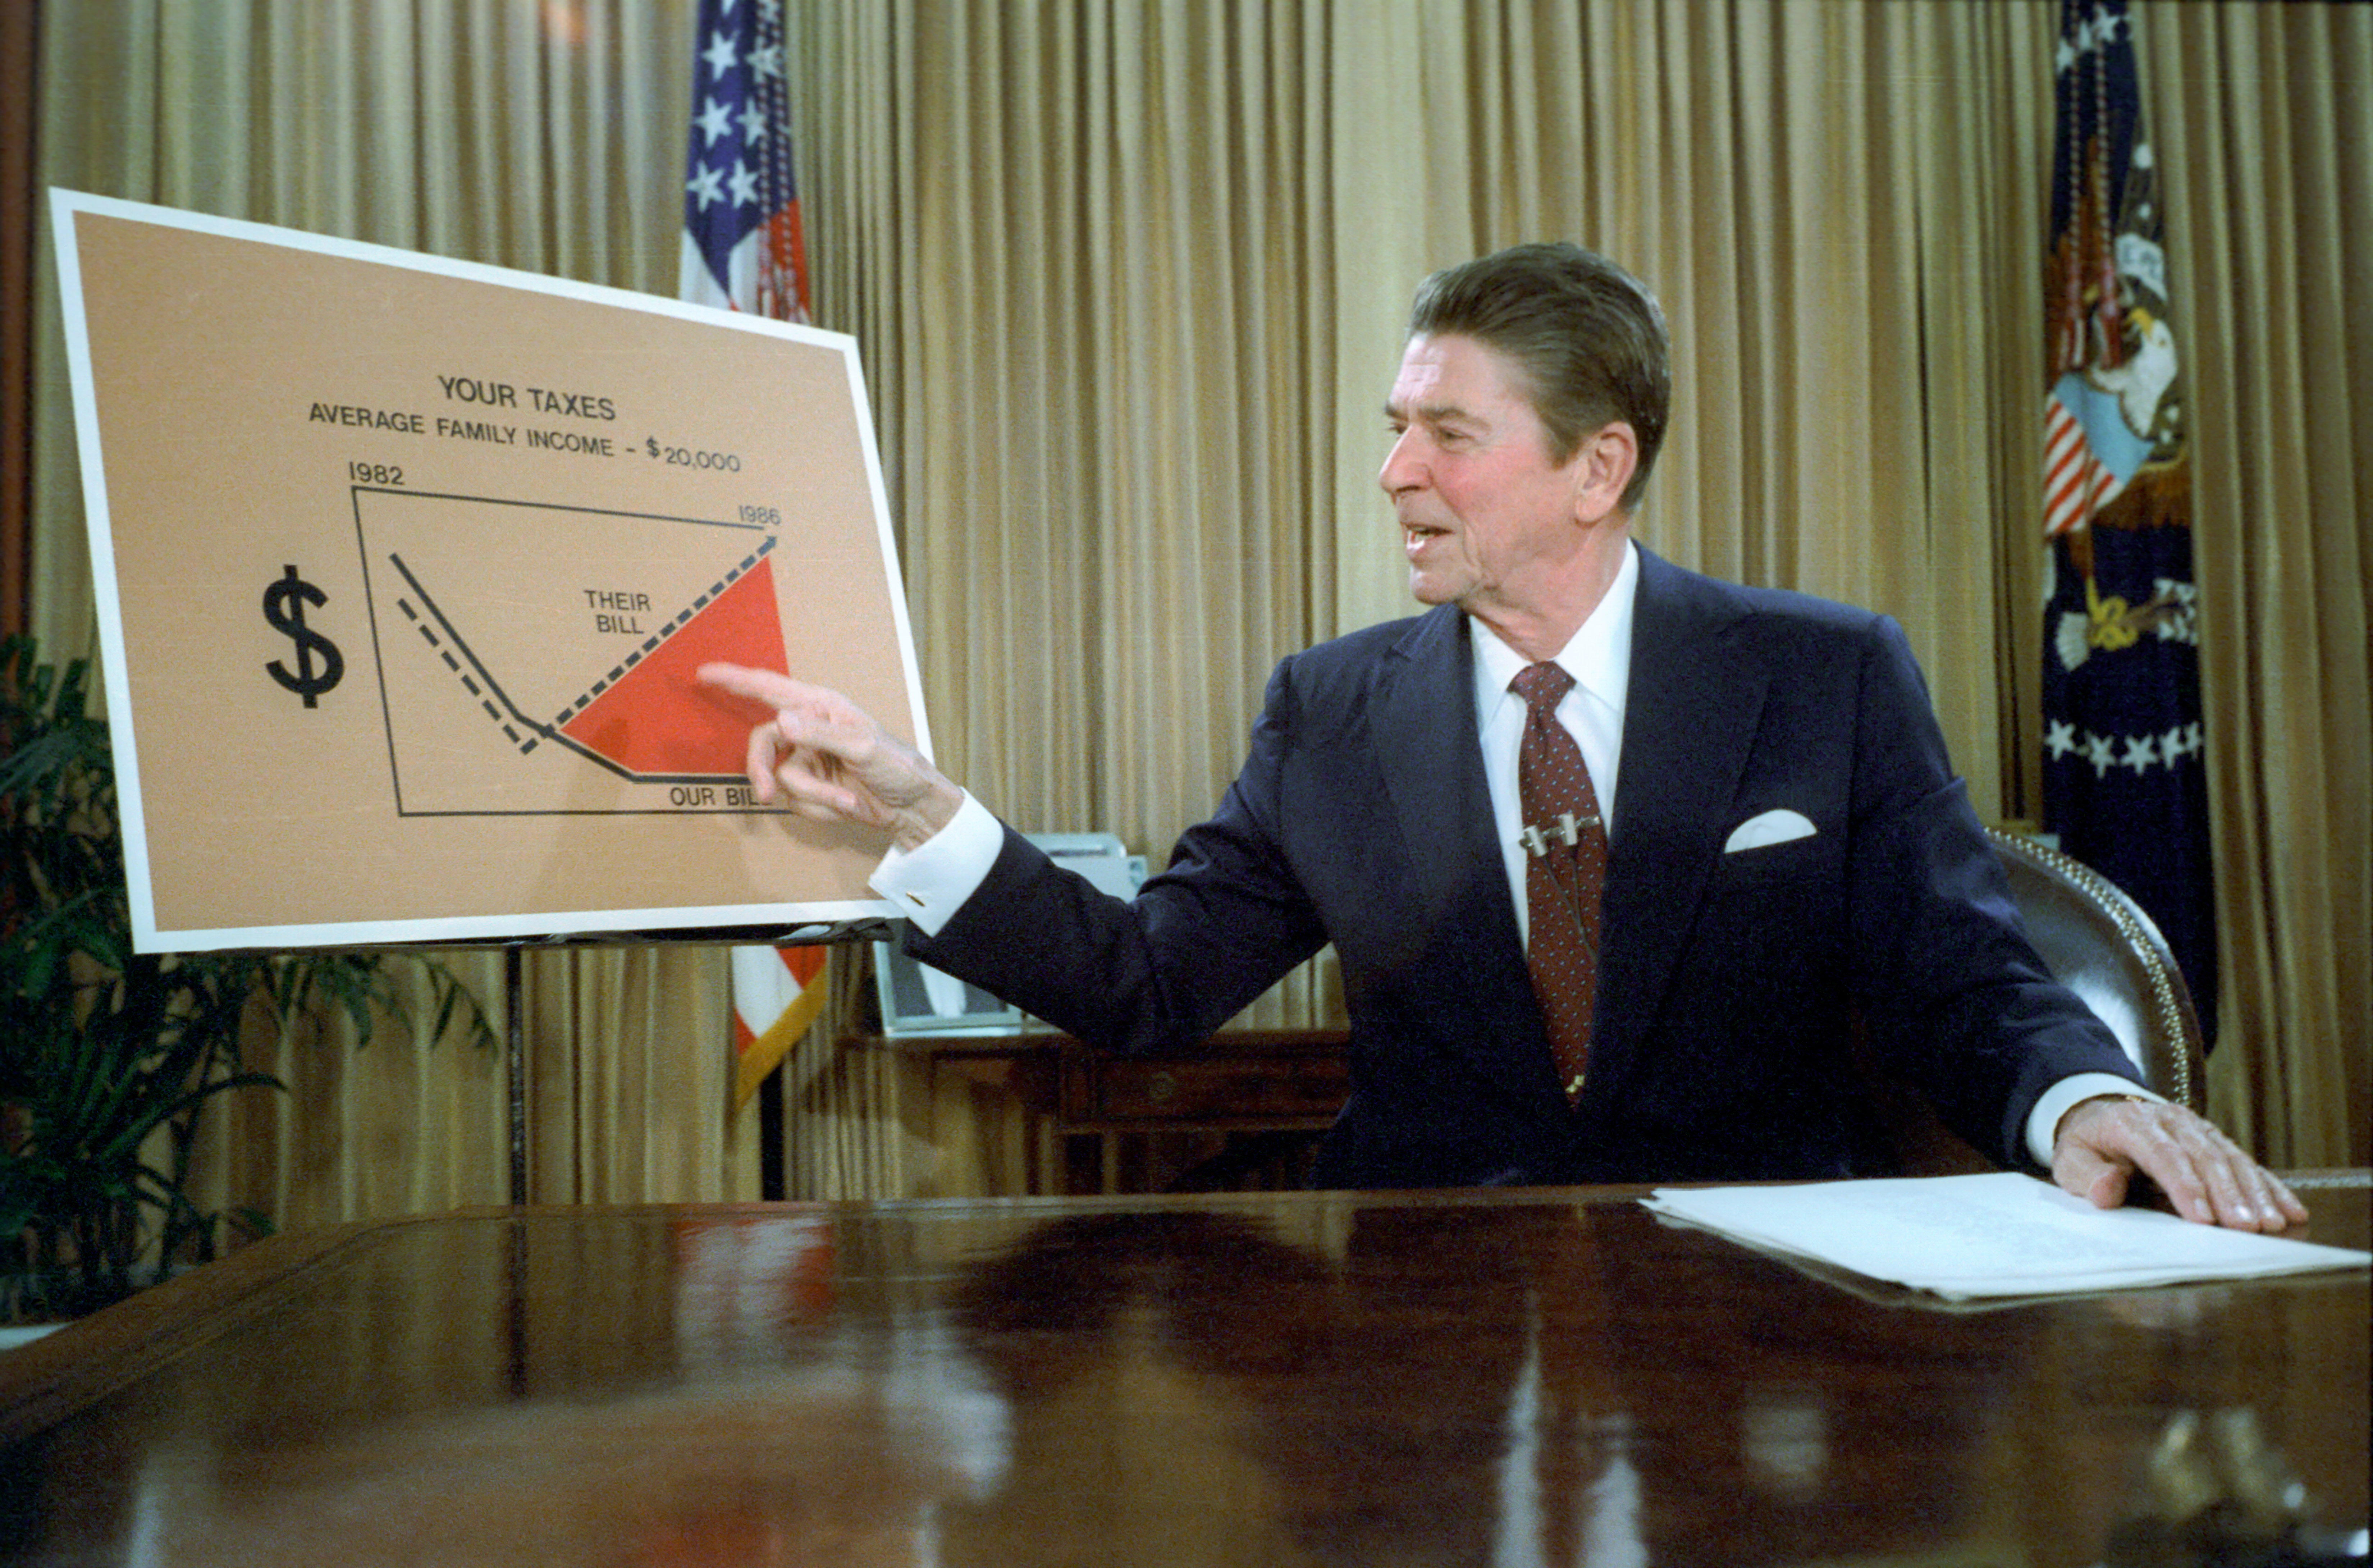 Tax cuts were a big part of the Reagan administration’s economic policy, as reflected in this image from a 1981 national address. 